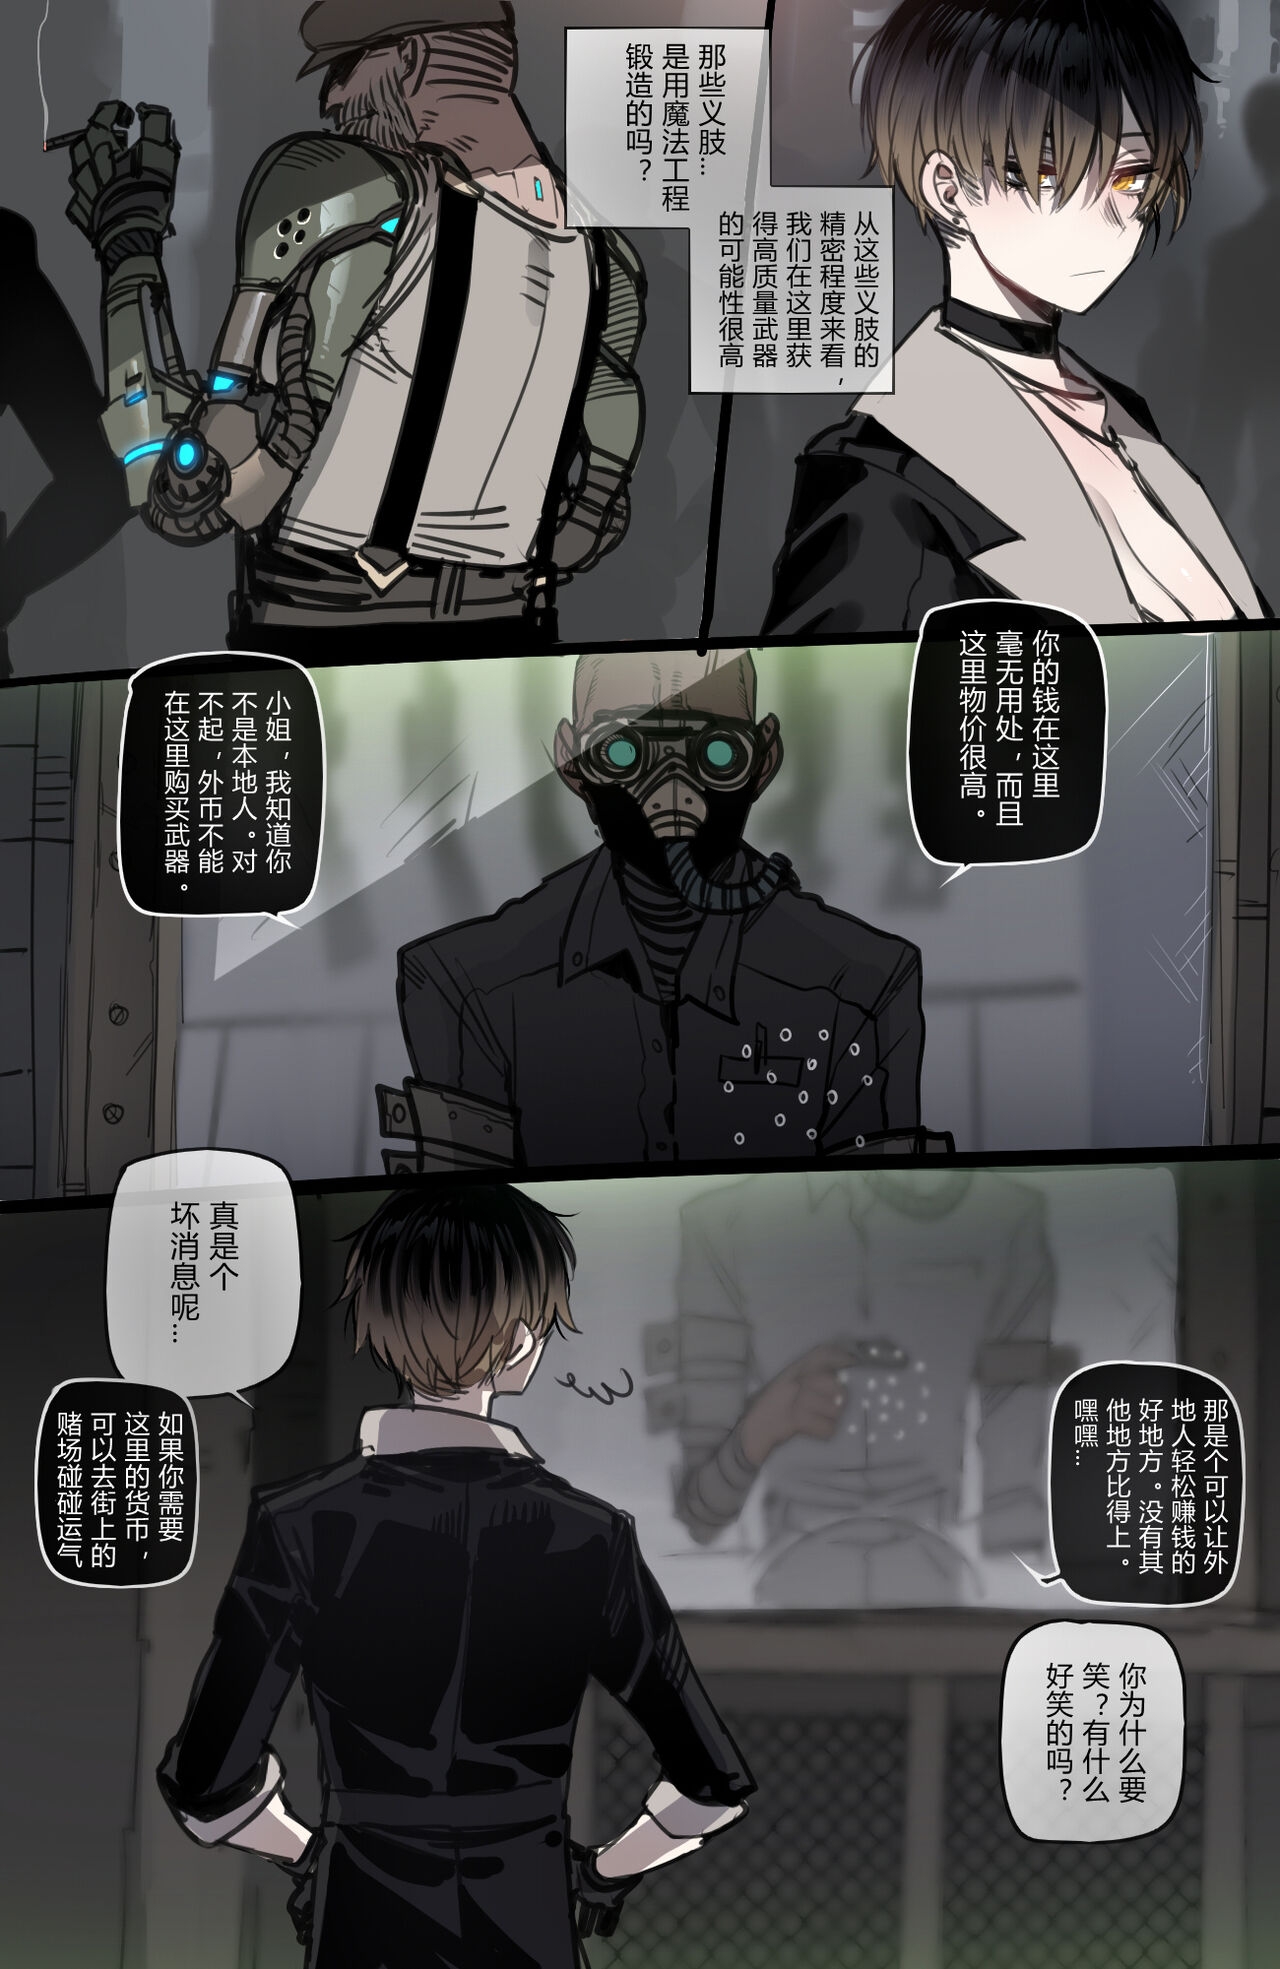 [ratatatat74] Bad Ending Party [chinese](Ongoing) 16